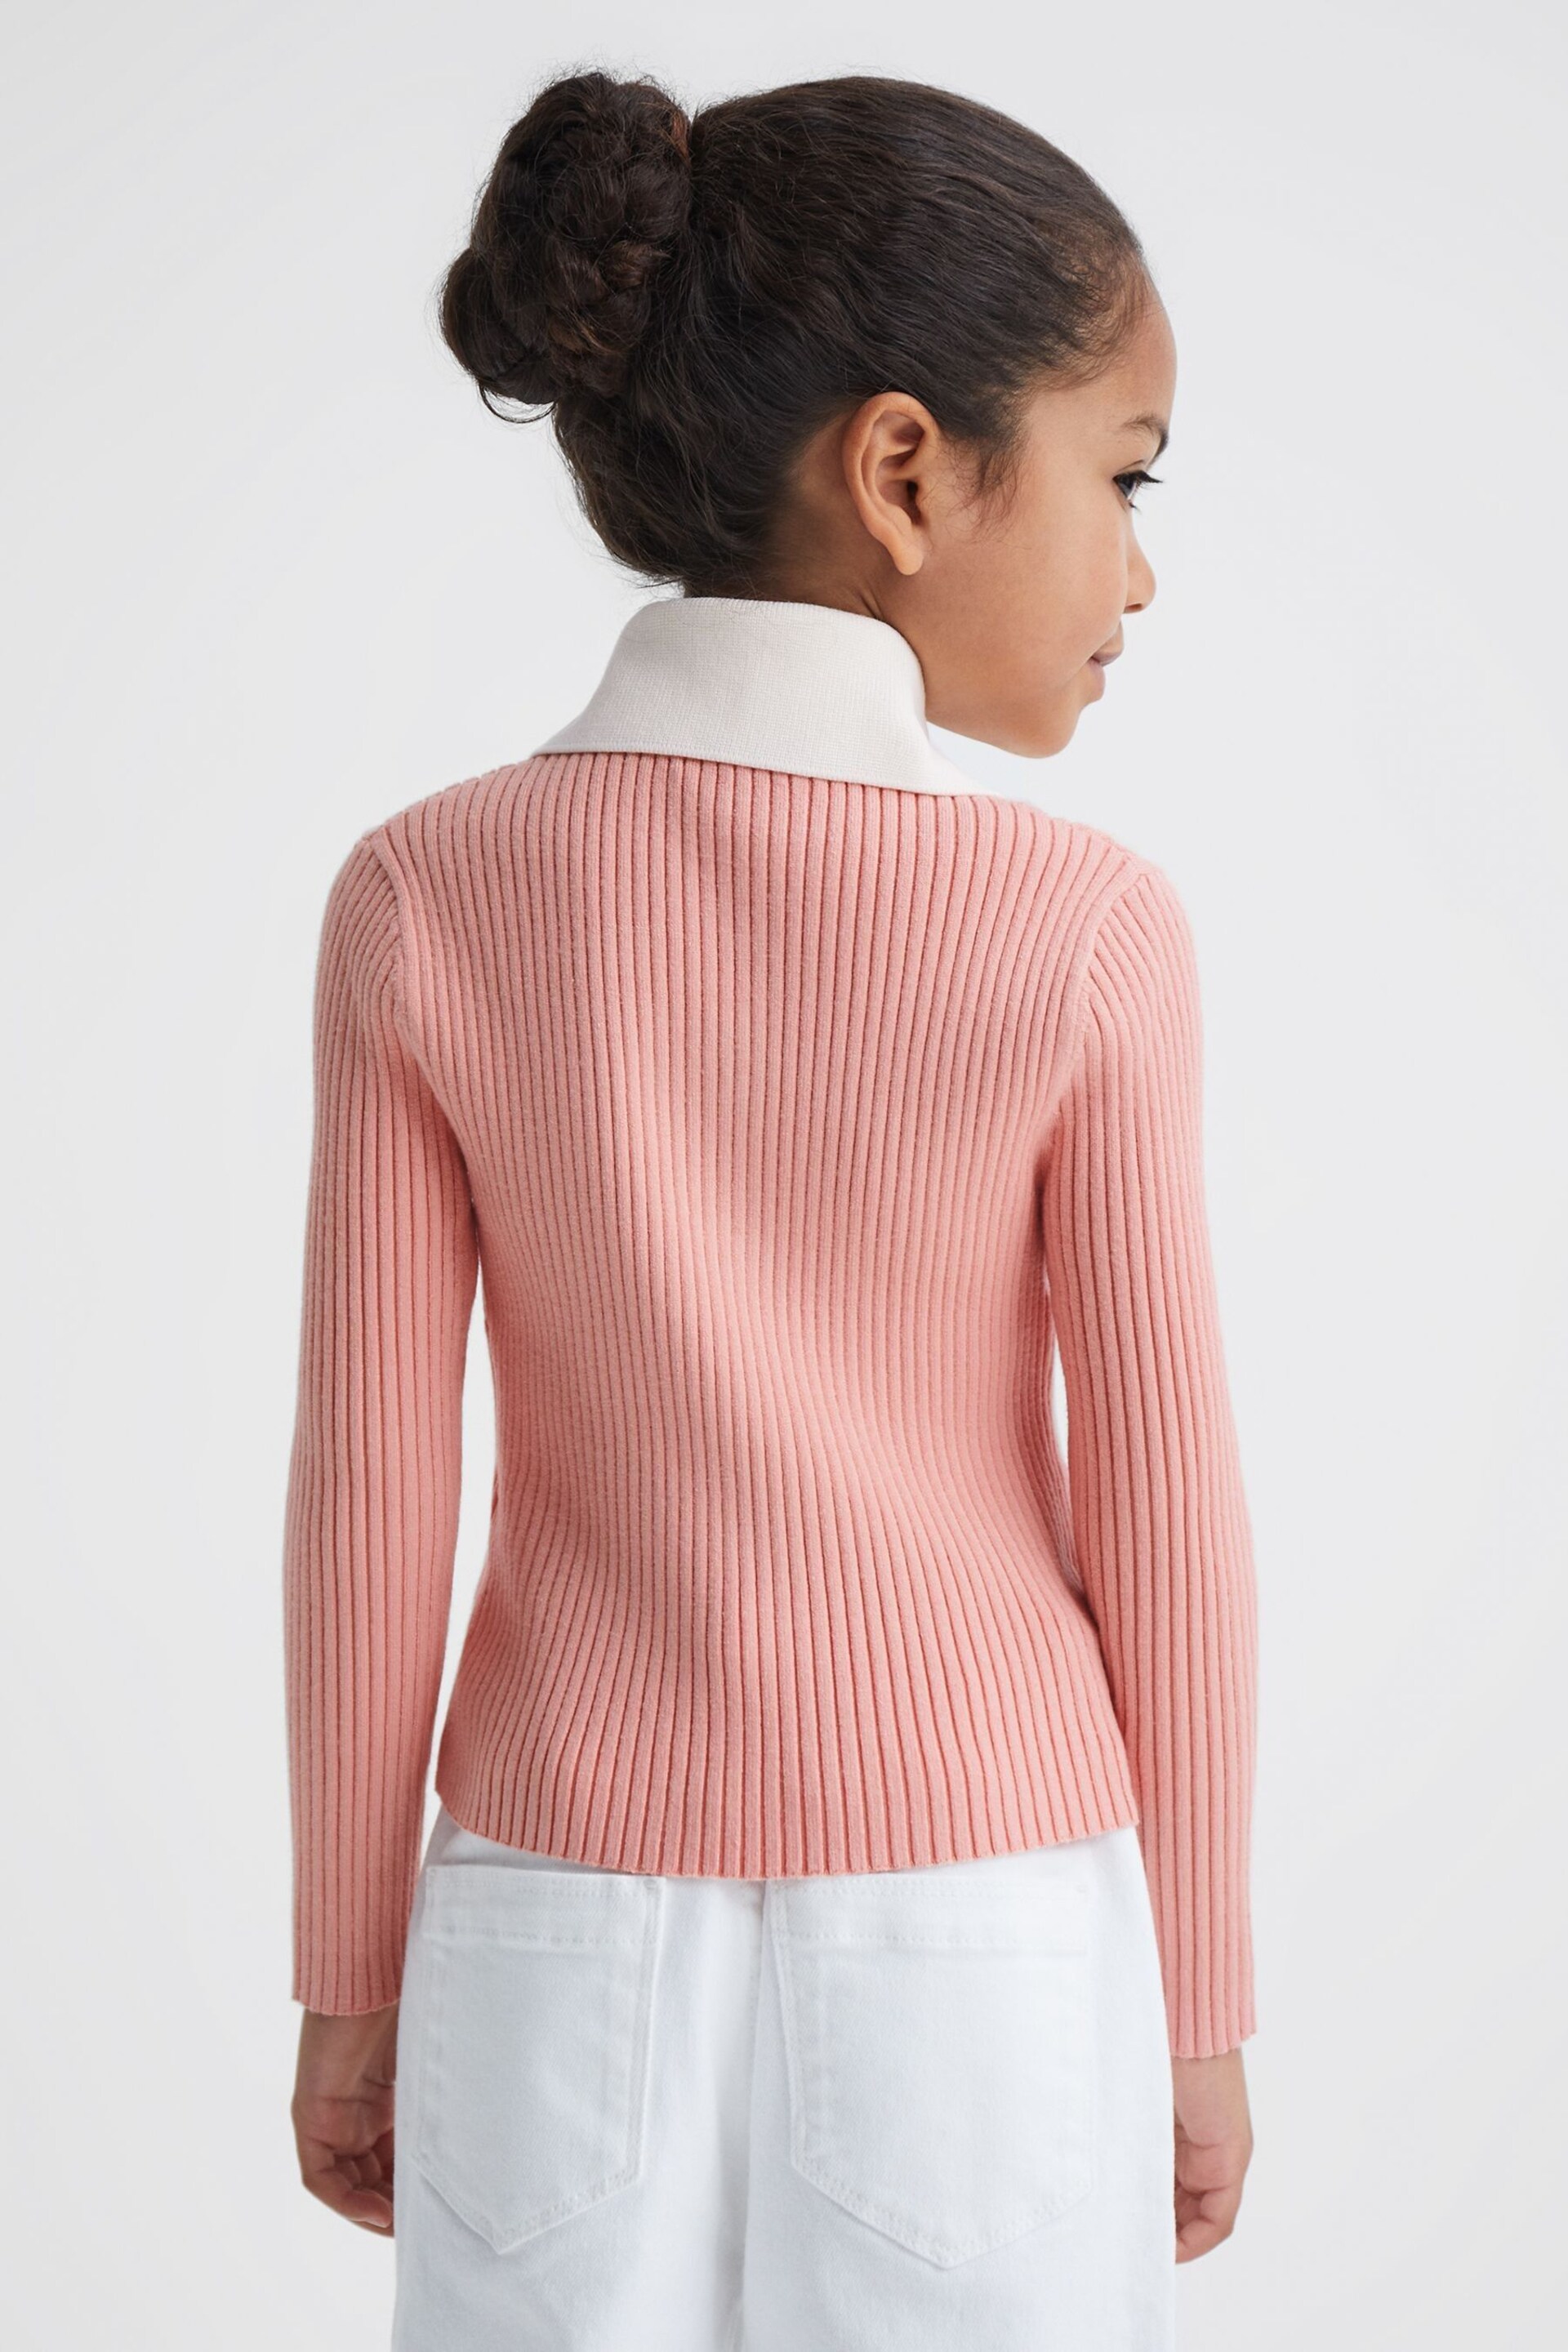 Reiss Pink Maia Junior Colourblock Knitted Top - Image 5 of 6